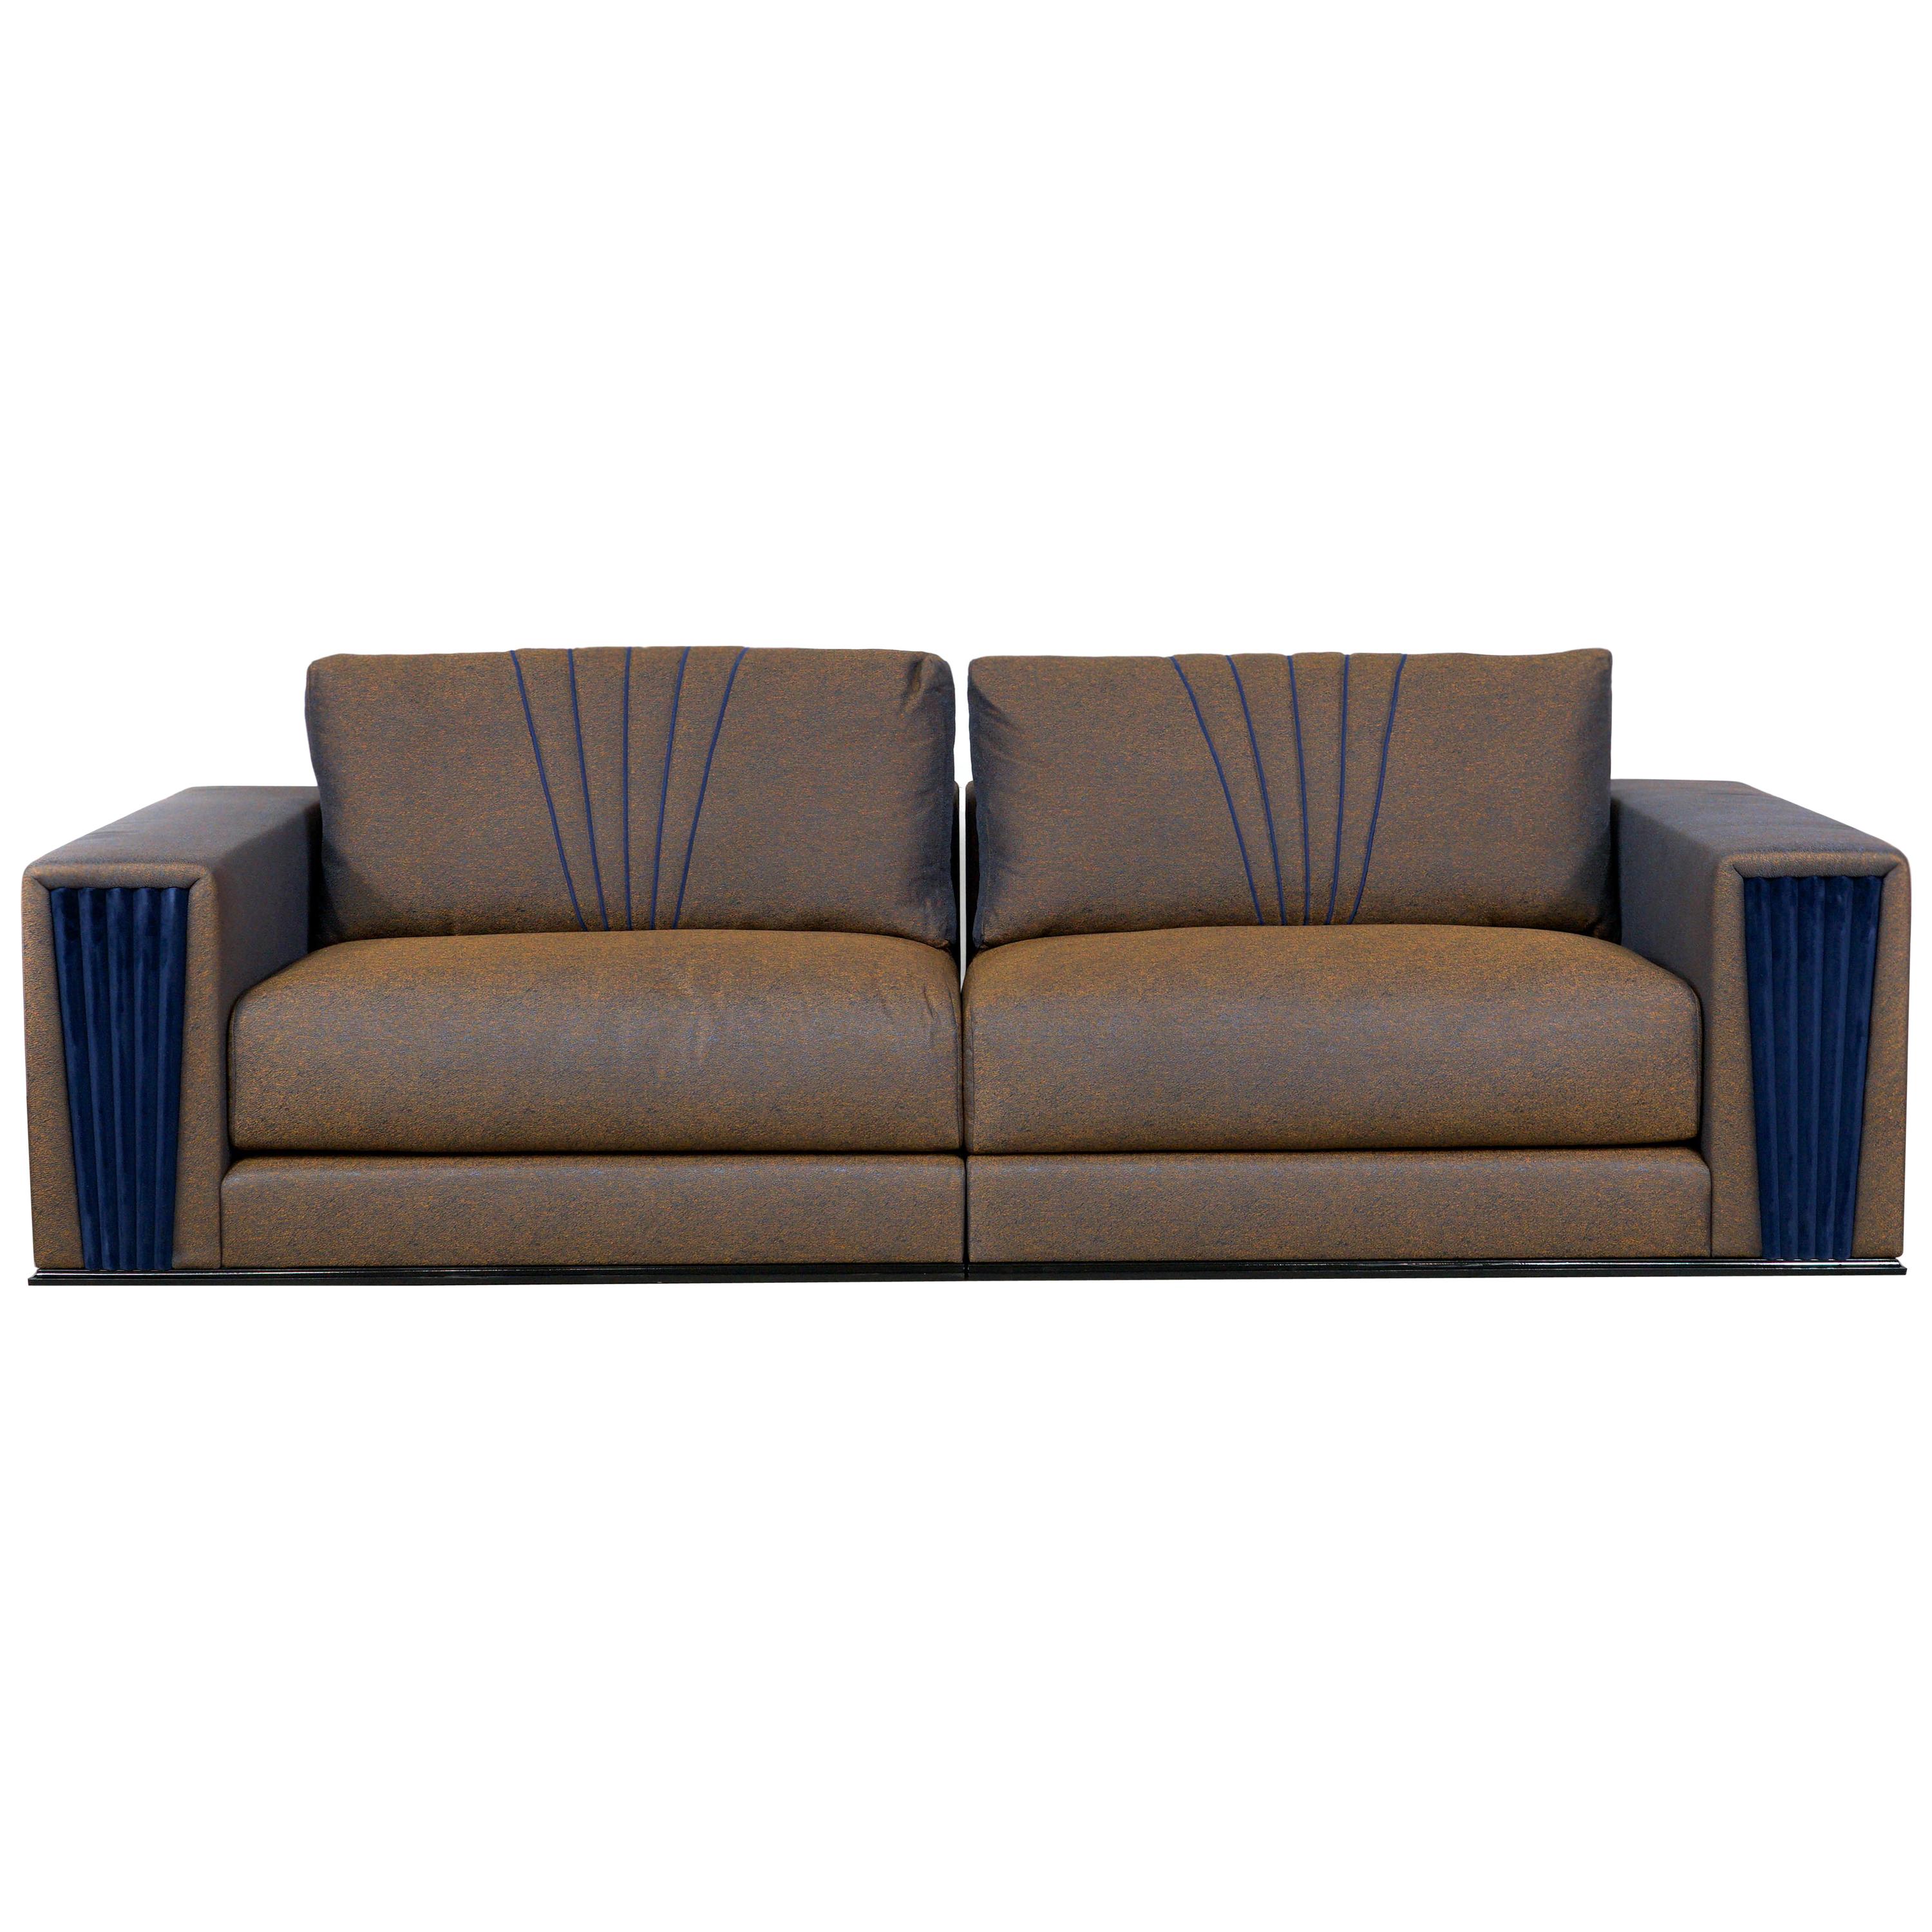 Heritage Collection Dorico 3-Seat Sofa For Sale